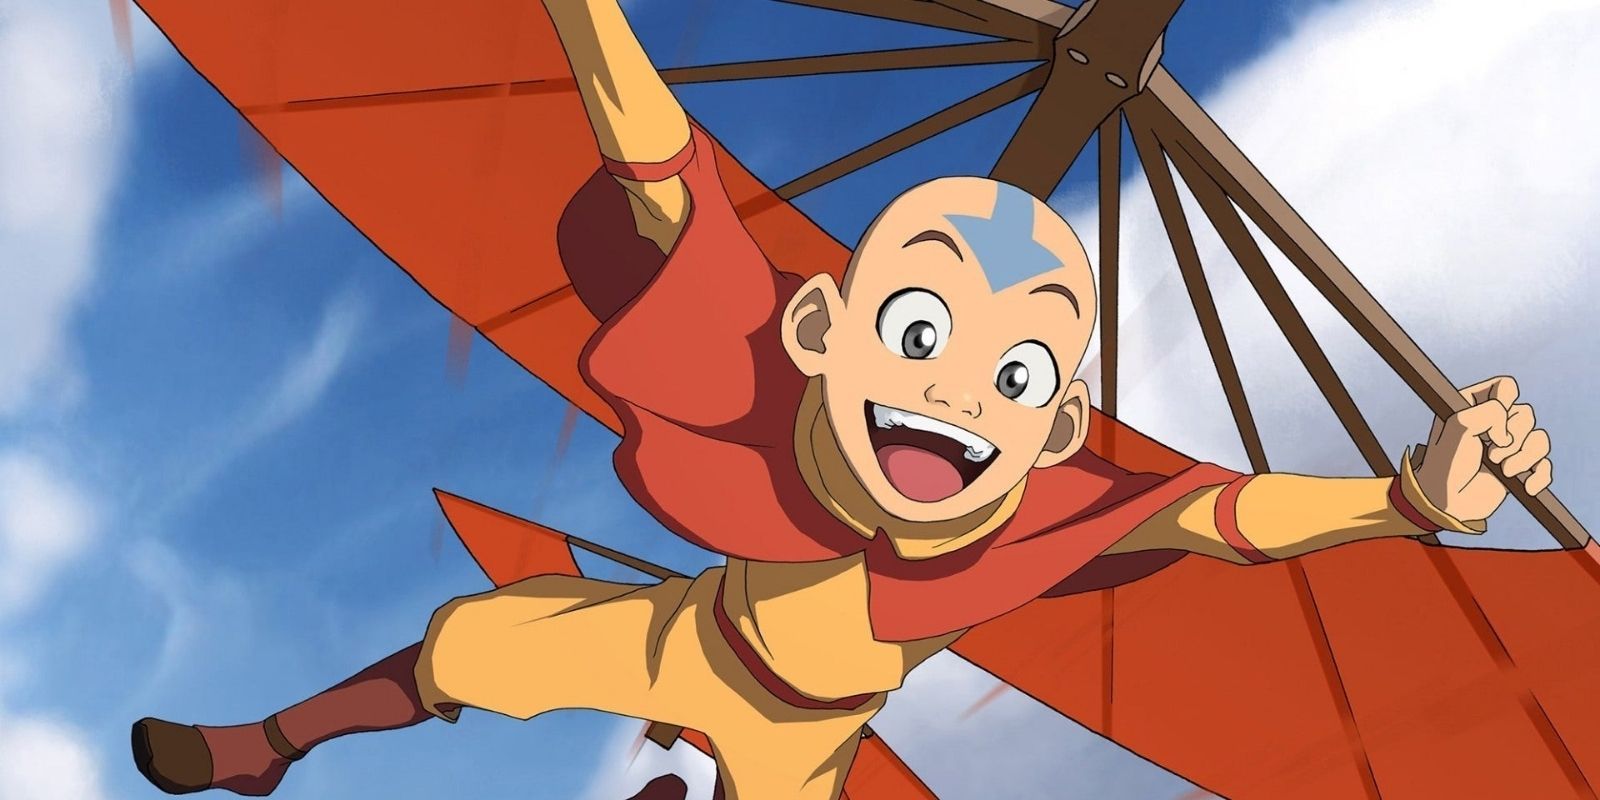 Aang from Avatar: The Last Airbender using his glider